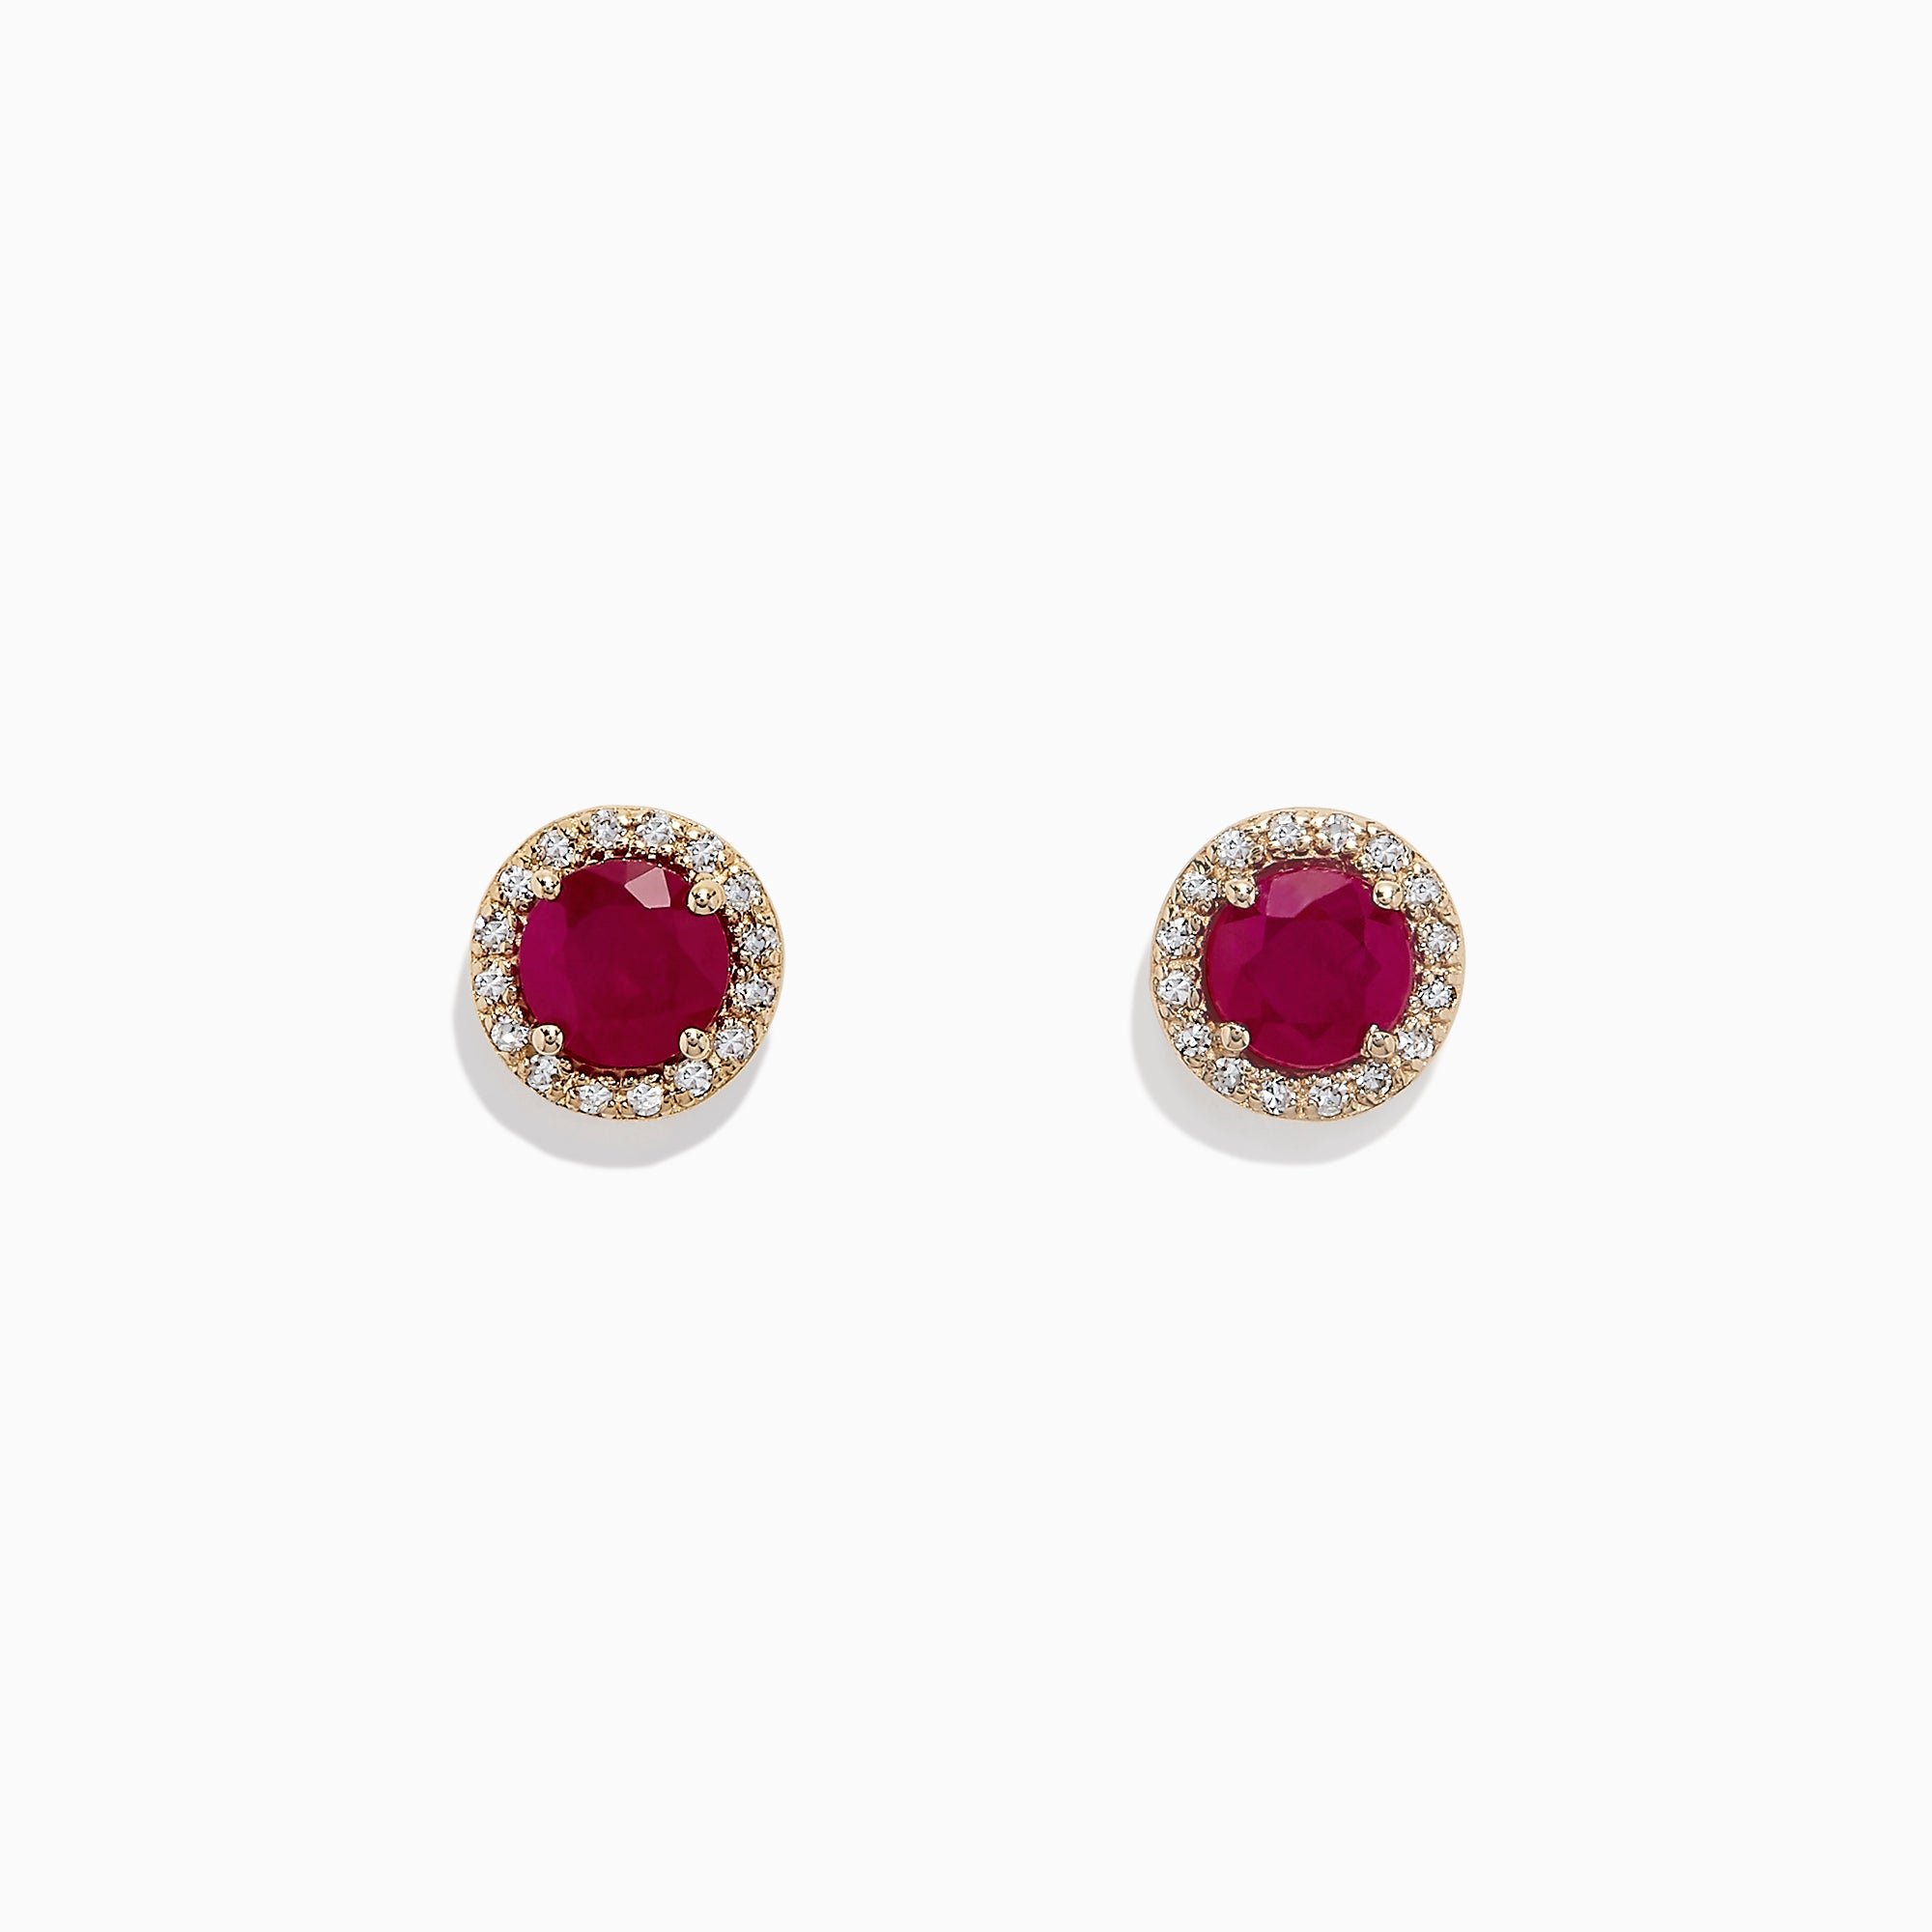 Ruby red stone earrings with cz pointers and pearl drop -